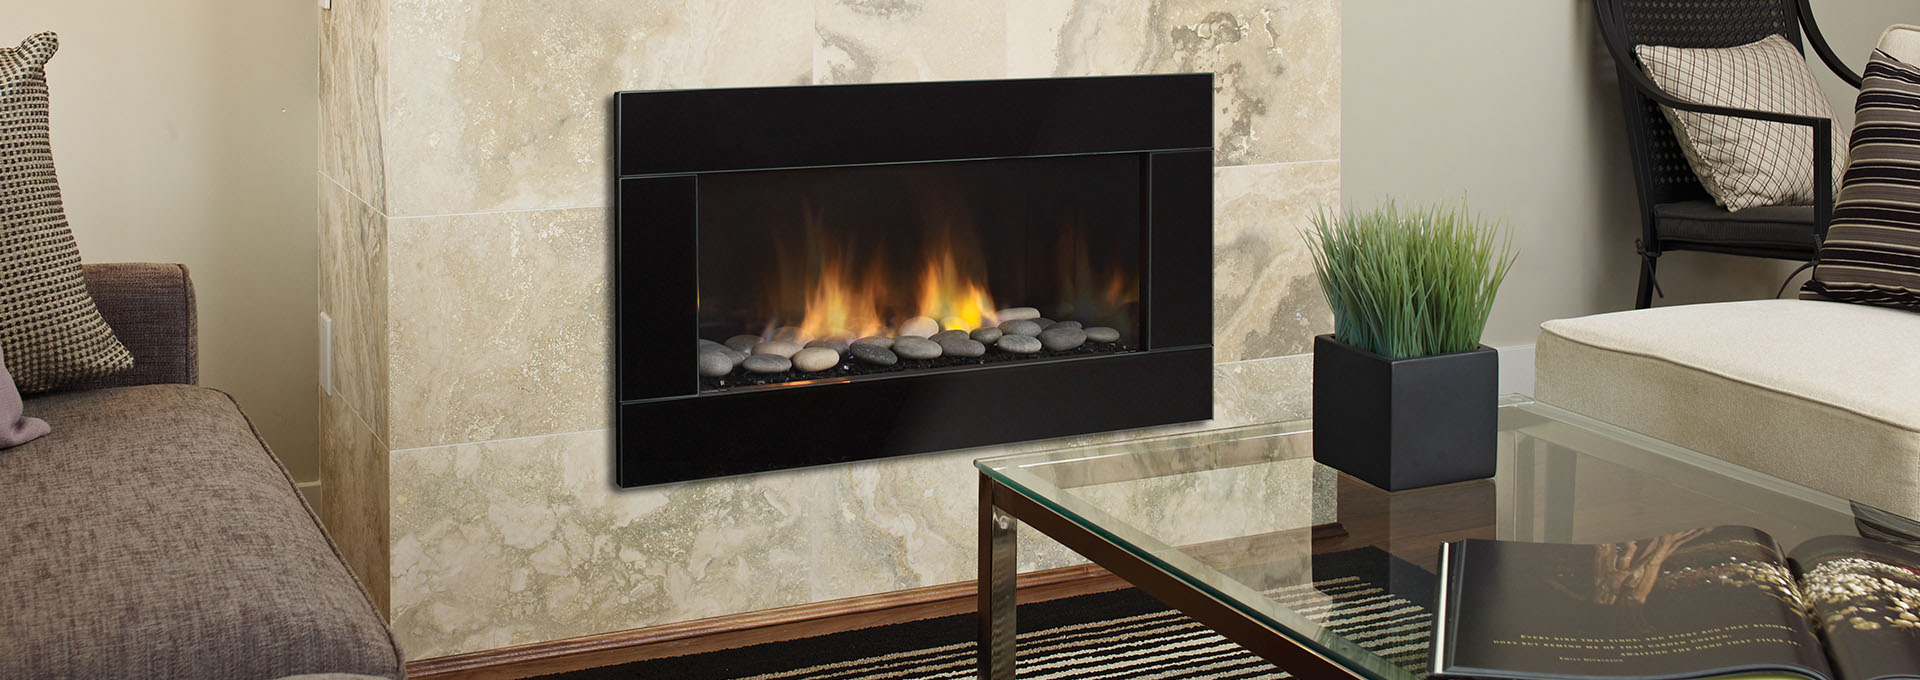 Vertical Wall Mount Electric Fireplace Best Of Fireplaces toronto Fireplace Repair & Maintenance